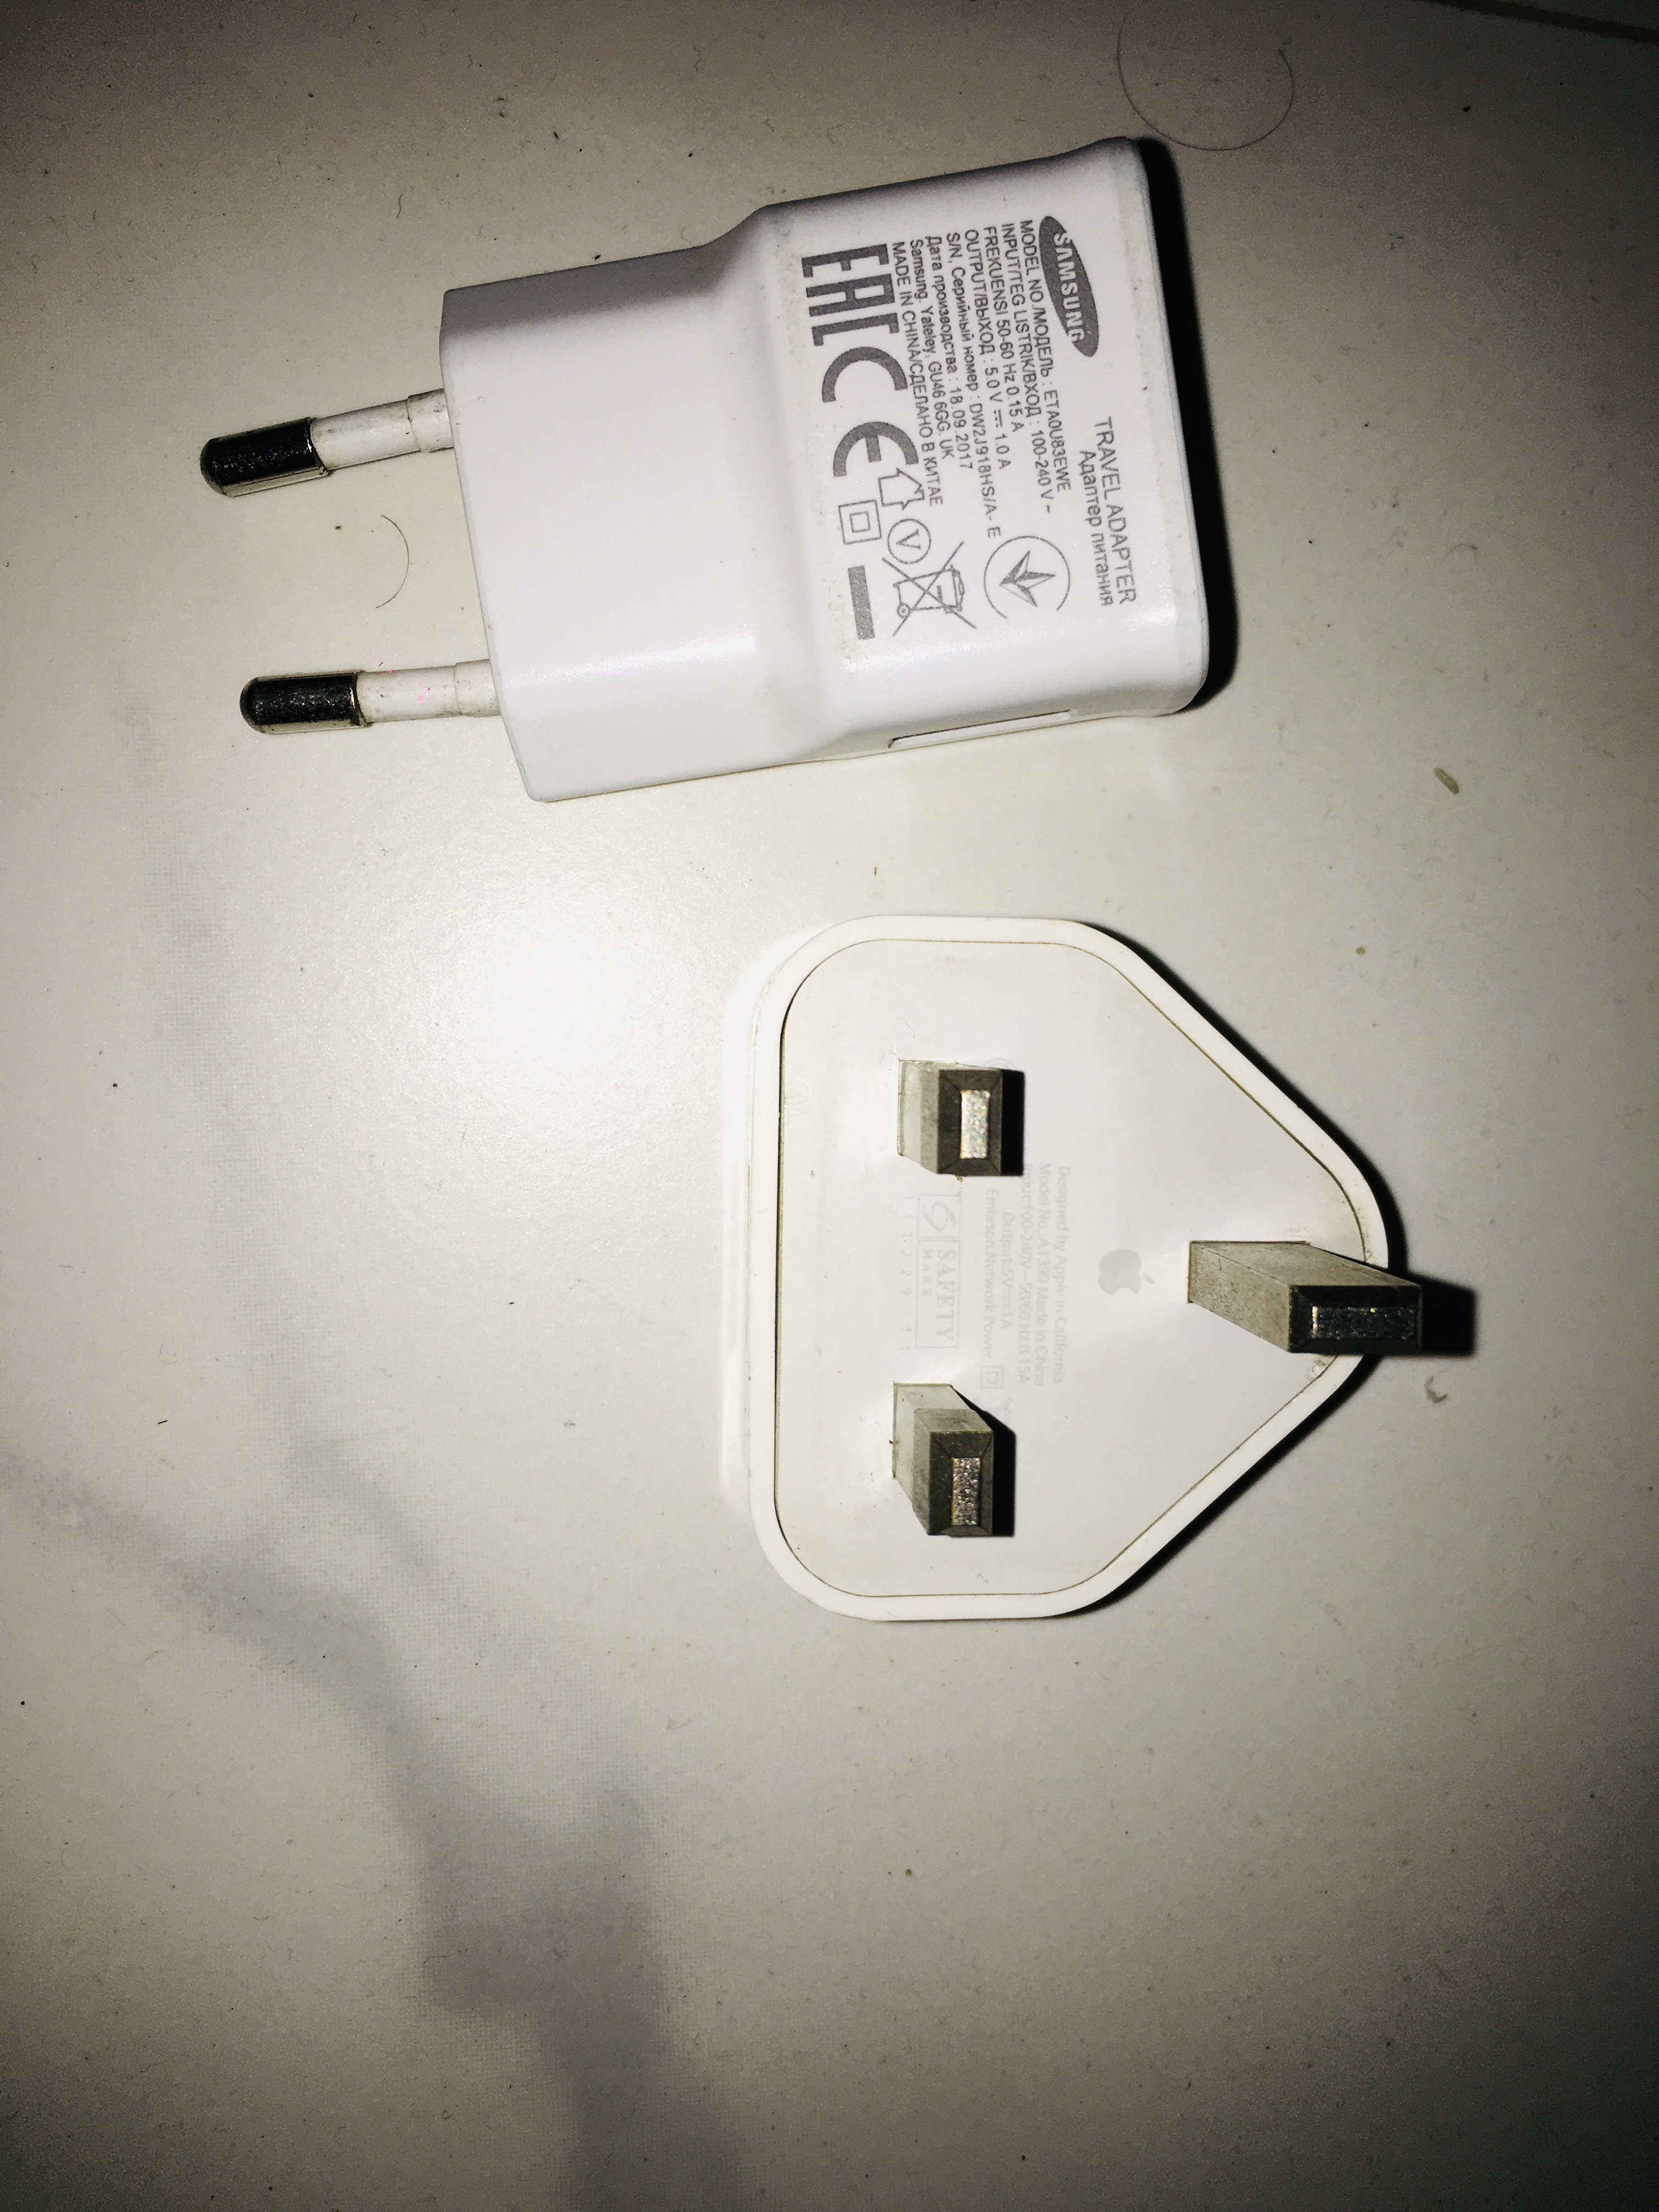 iPhone charging with Android - Apple Community